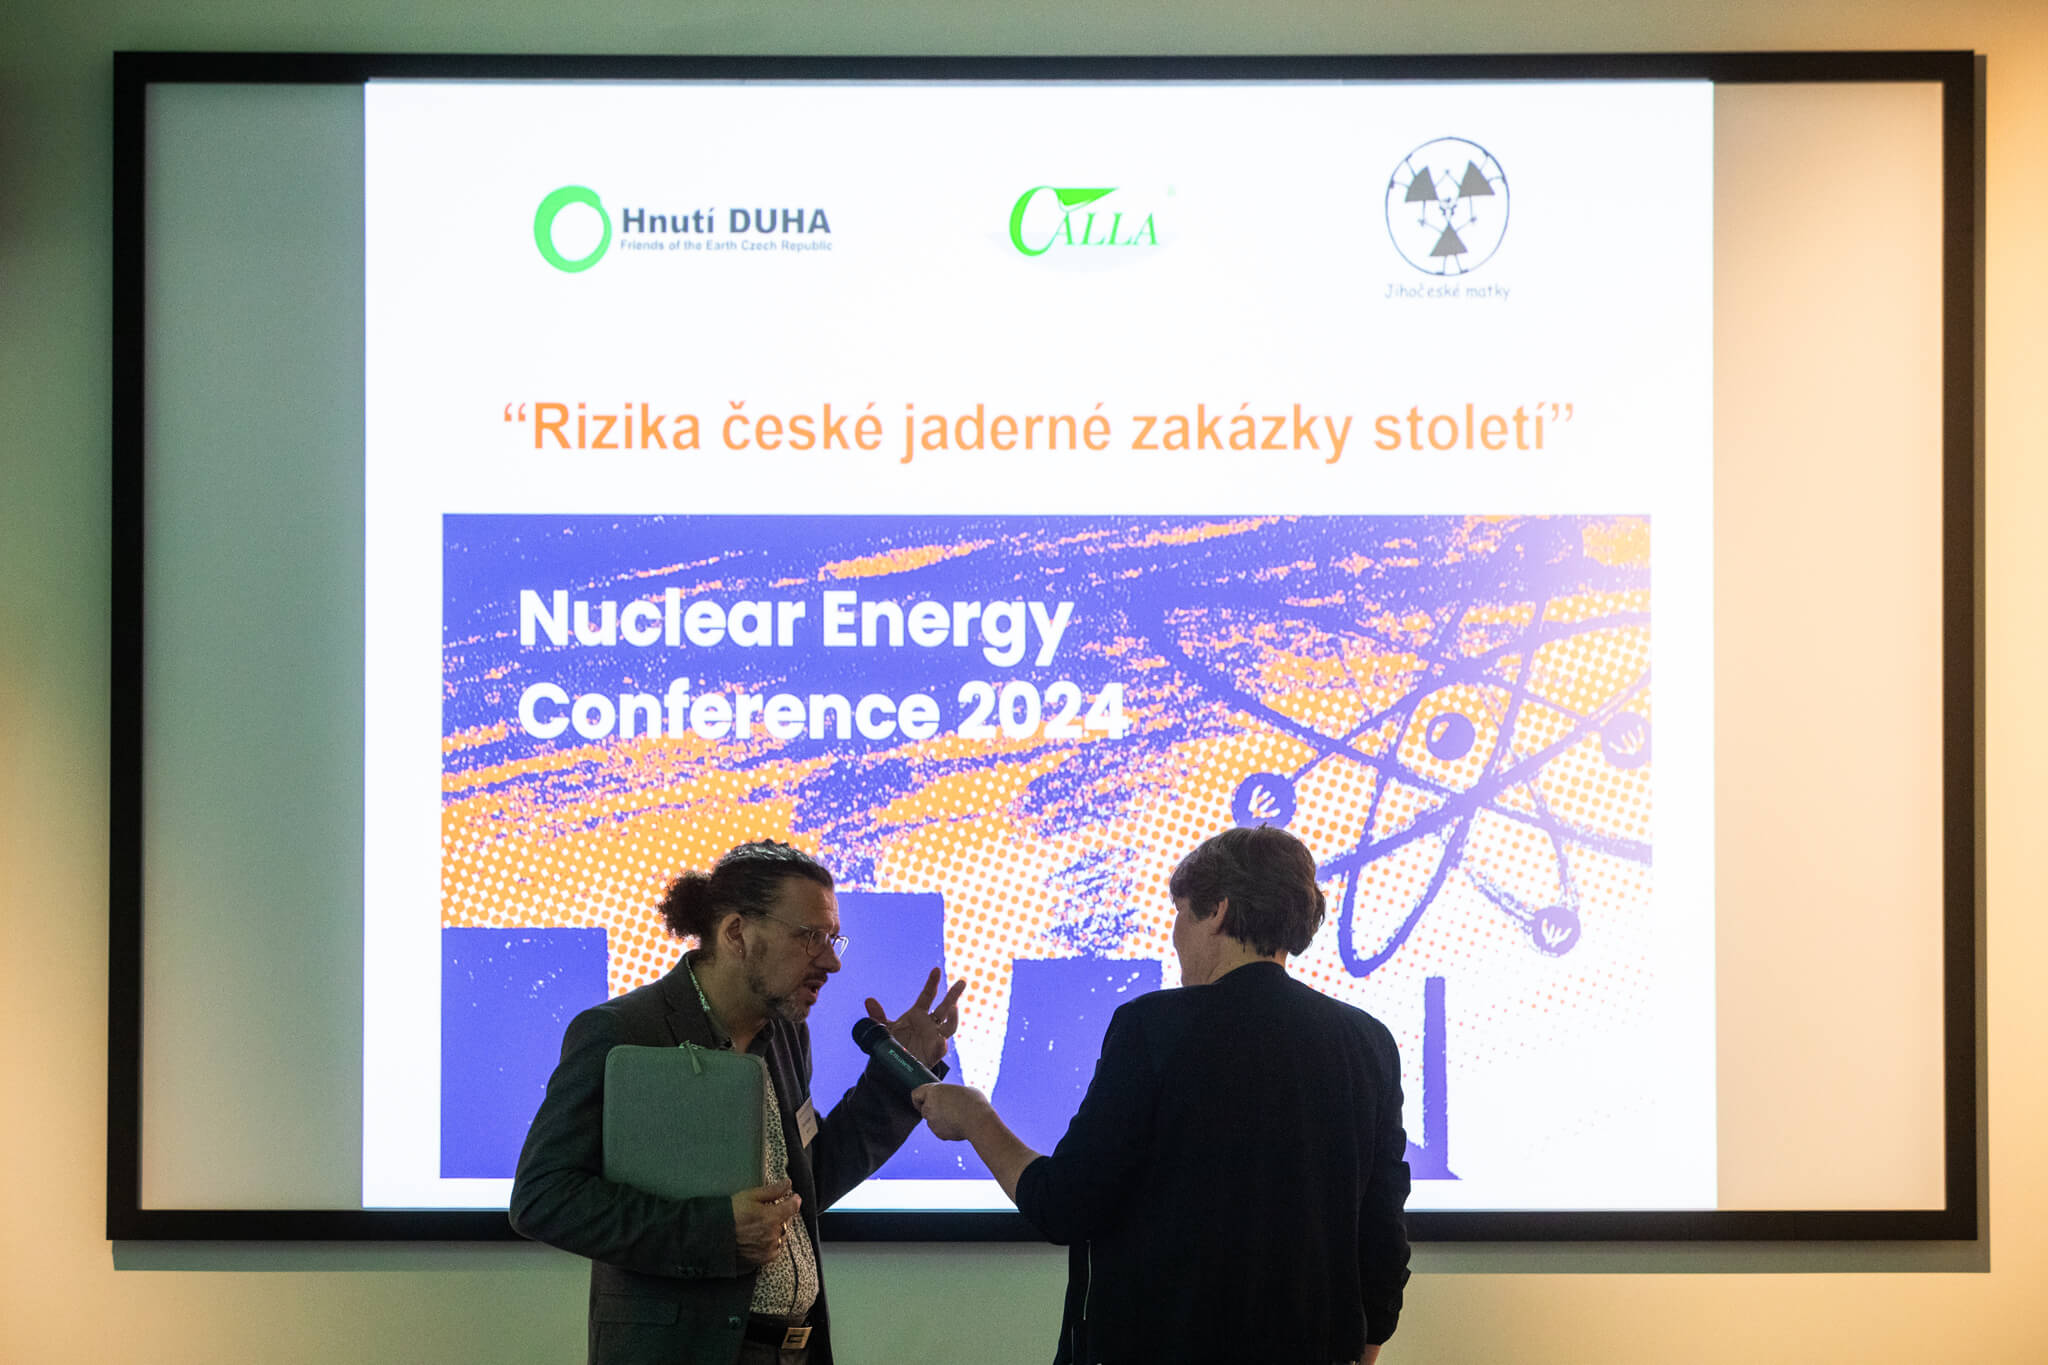 Don’t Nuke the Climate: Nuclear Energy Conference 2024 in Prag